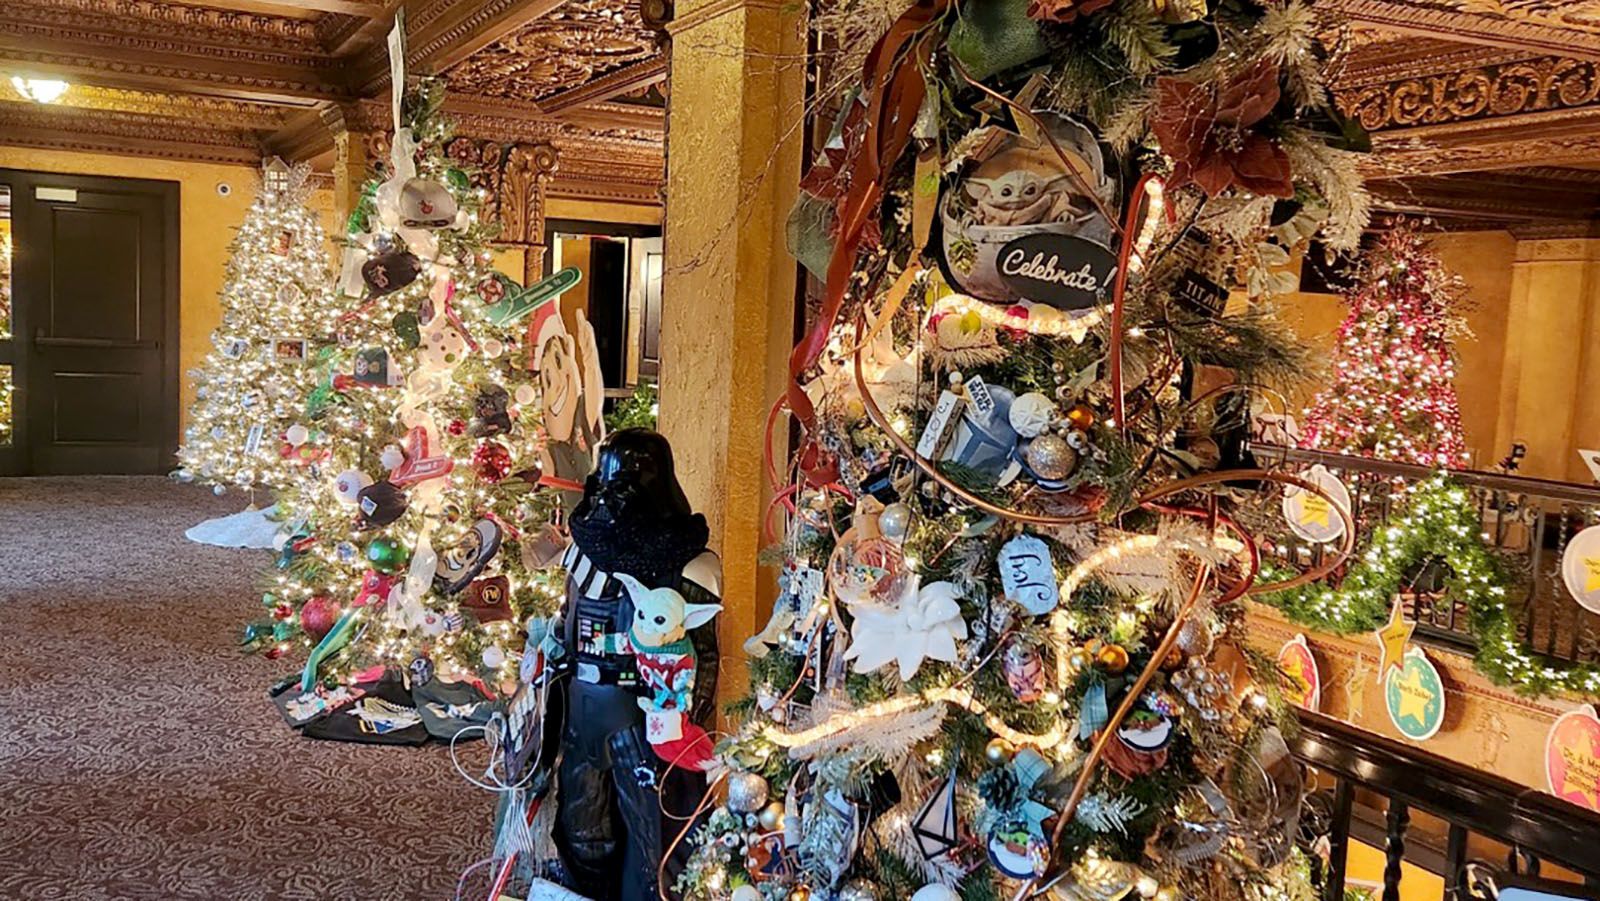 Embassy Theatre saw a record turnout of their latest Festival of Trees.